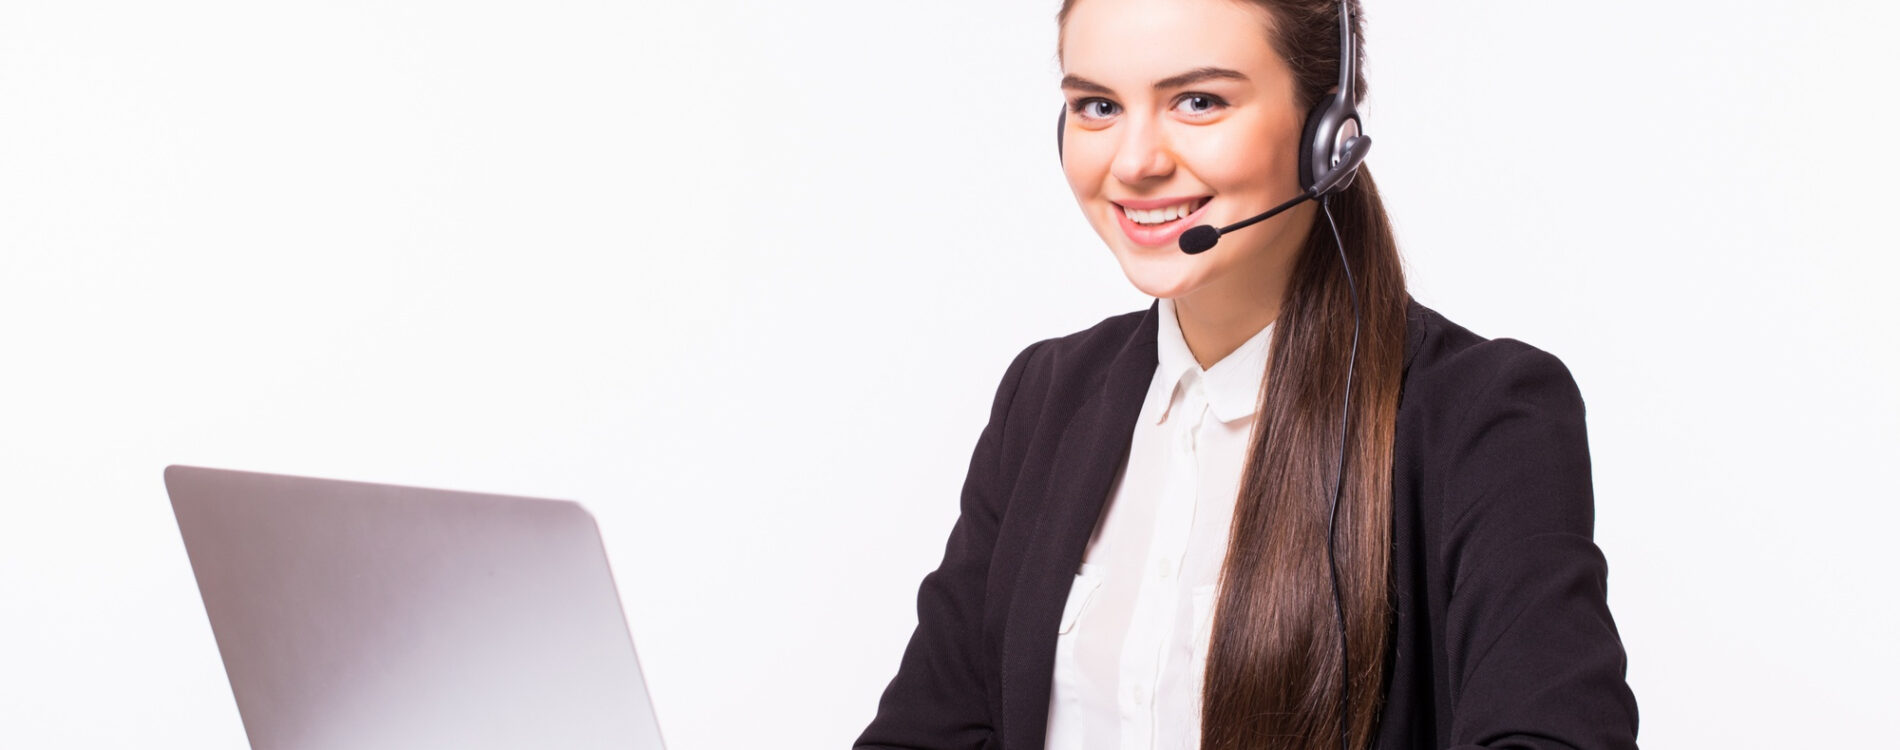 young-woman-working-office-with-laptop-headphones-white-wall-customer-service-call-center